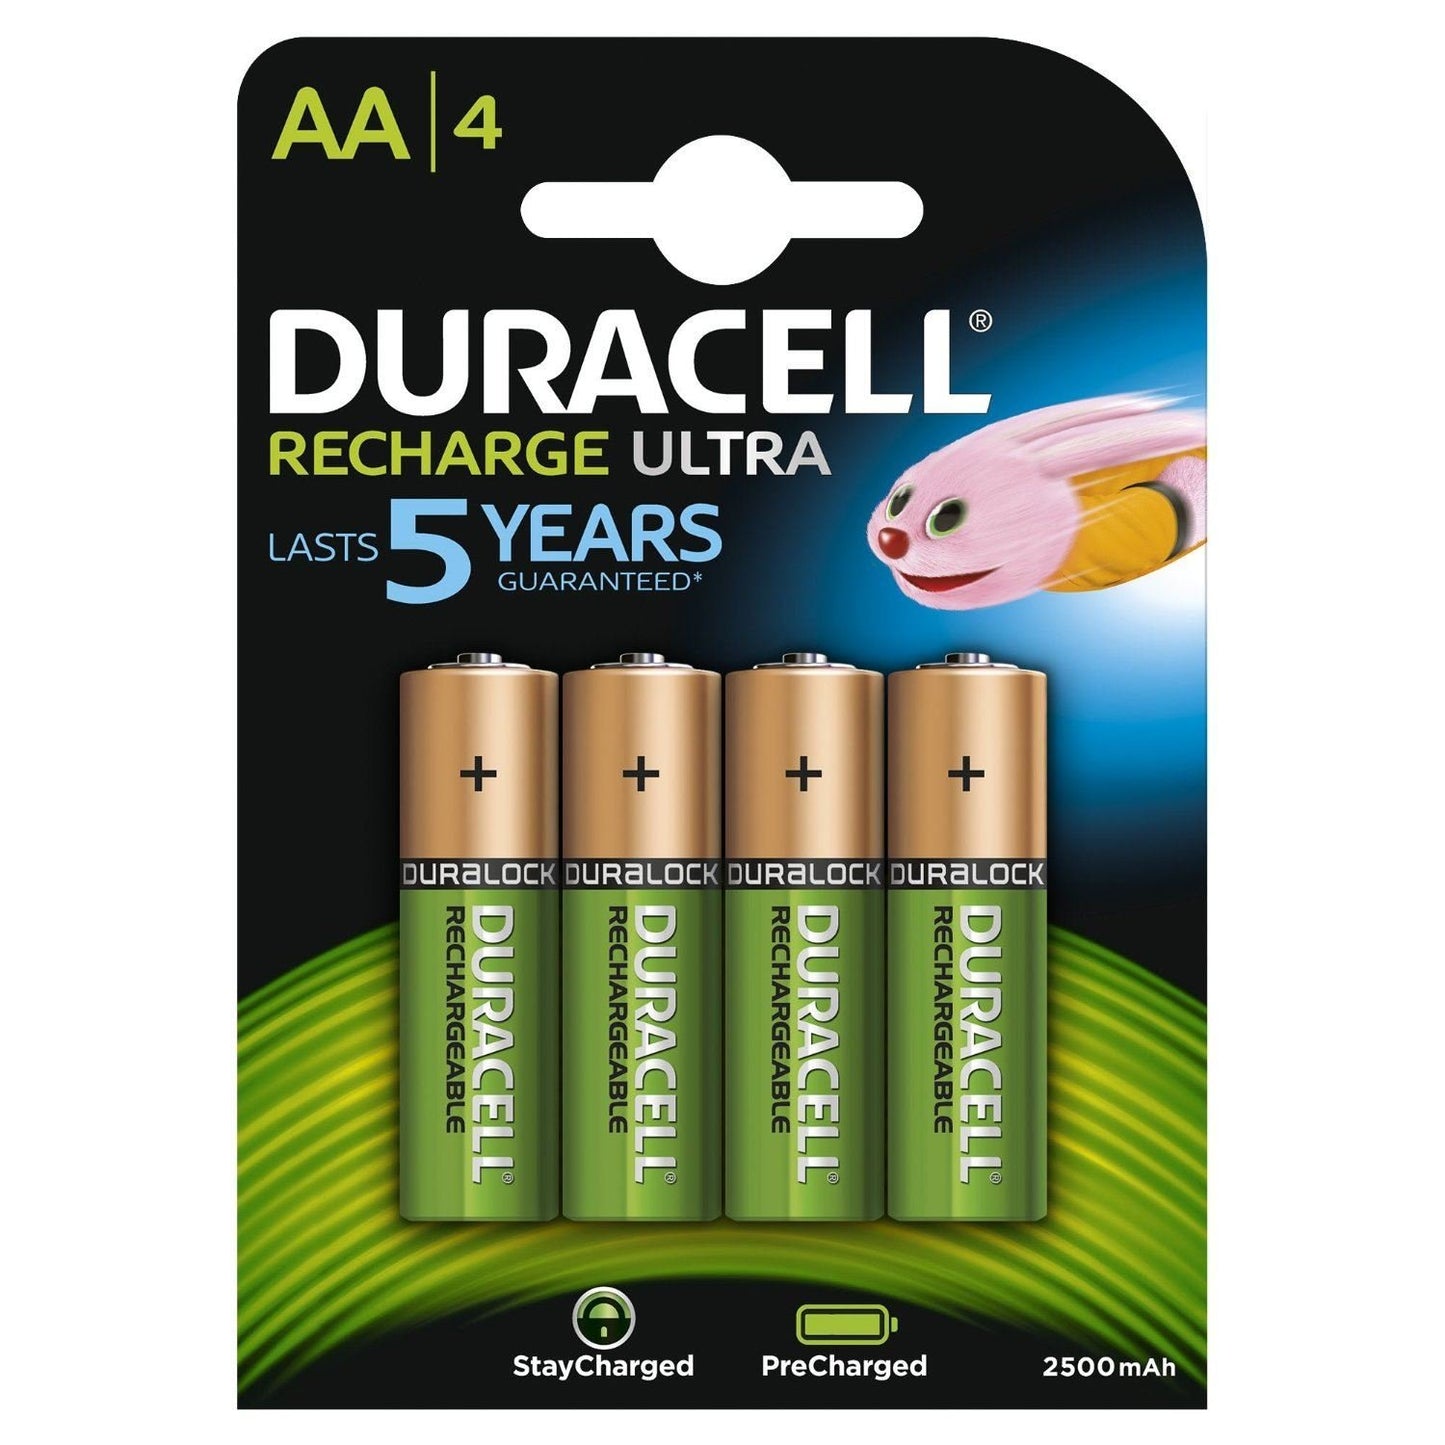 Duracell Recharge Ultra AA BatteriesNiMH 2500mAh - Pack of 4